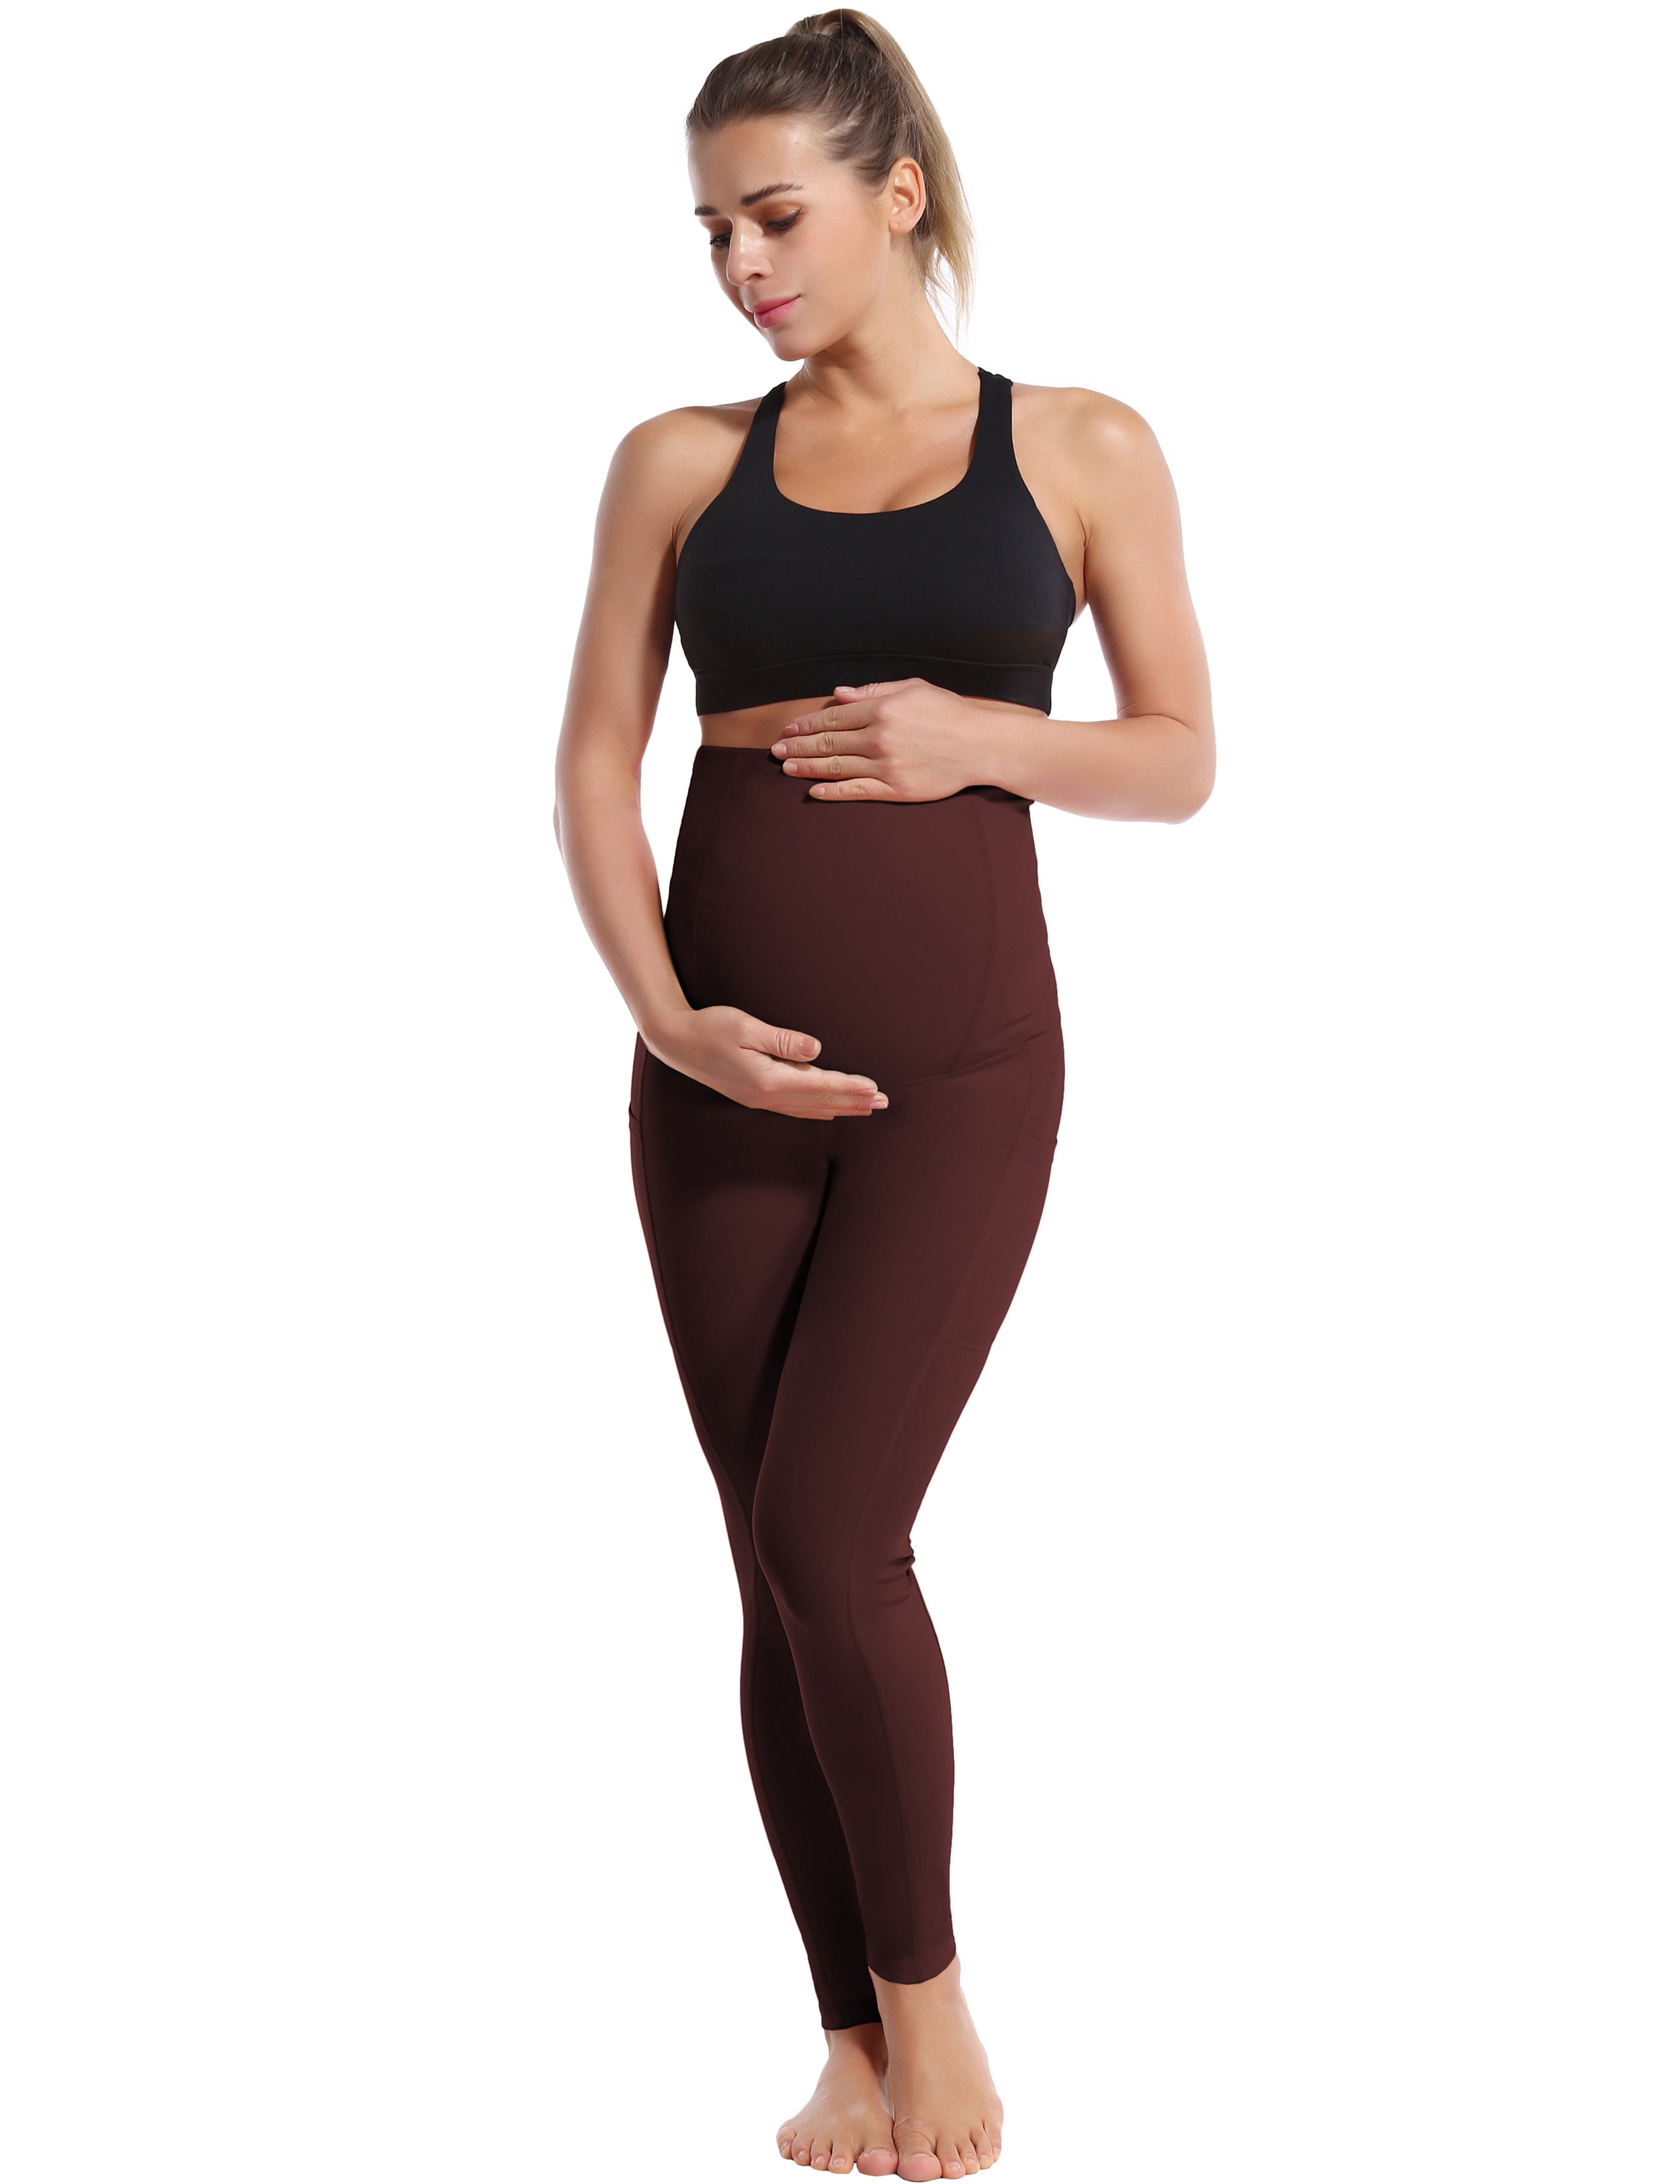 26" Side Pockets Maternity Yoga Pants mahoganymaroon 87%Nylon/13%Spandex Softest-ever fabric High elasticity 4-way stretch Fabric doesn't attract lint easily No see-through Moisture-wicking Machine wash